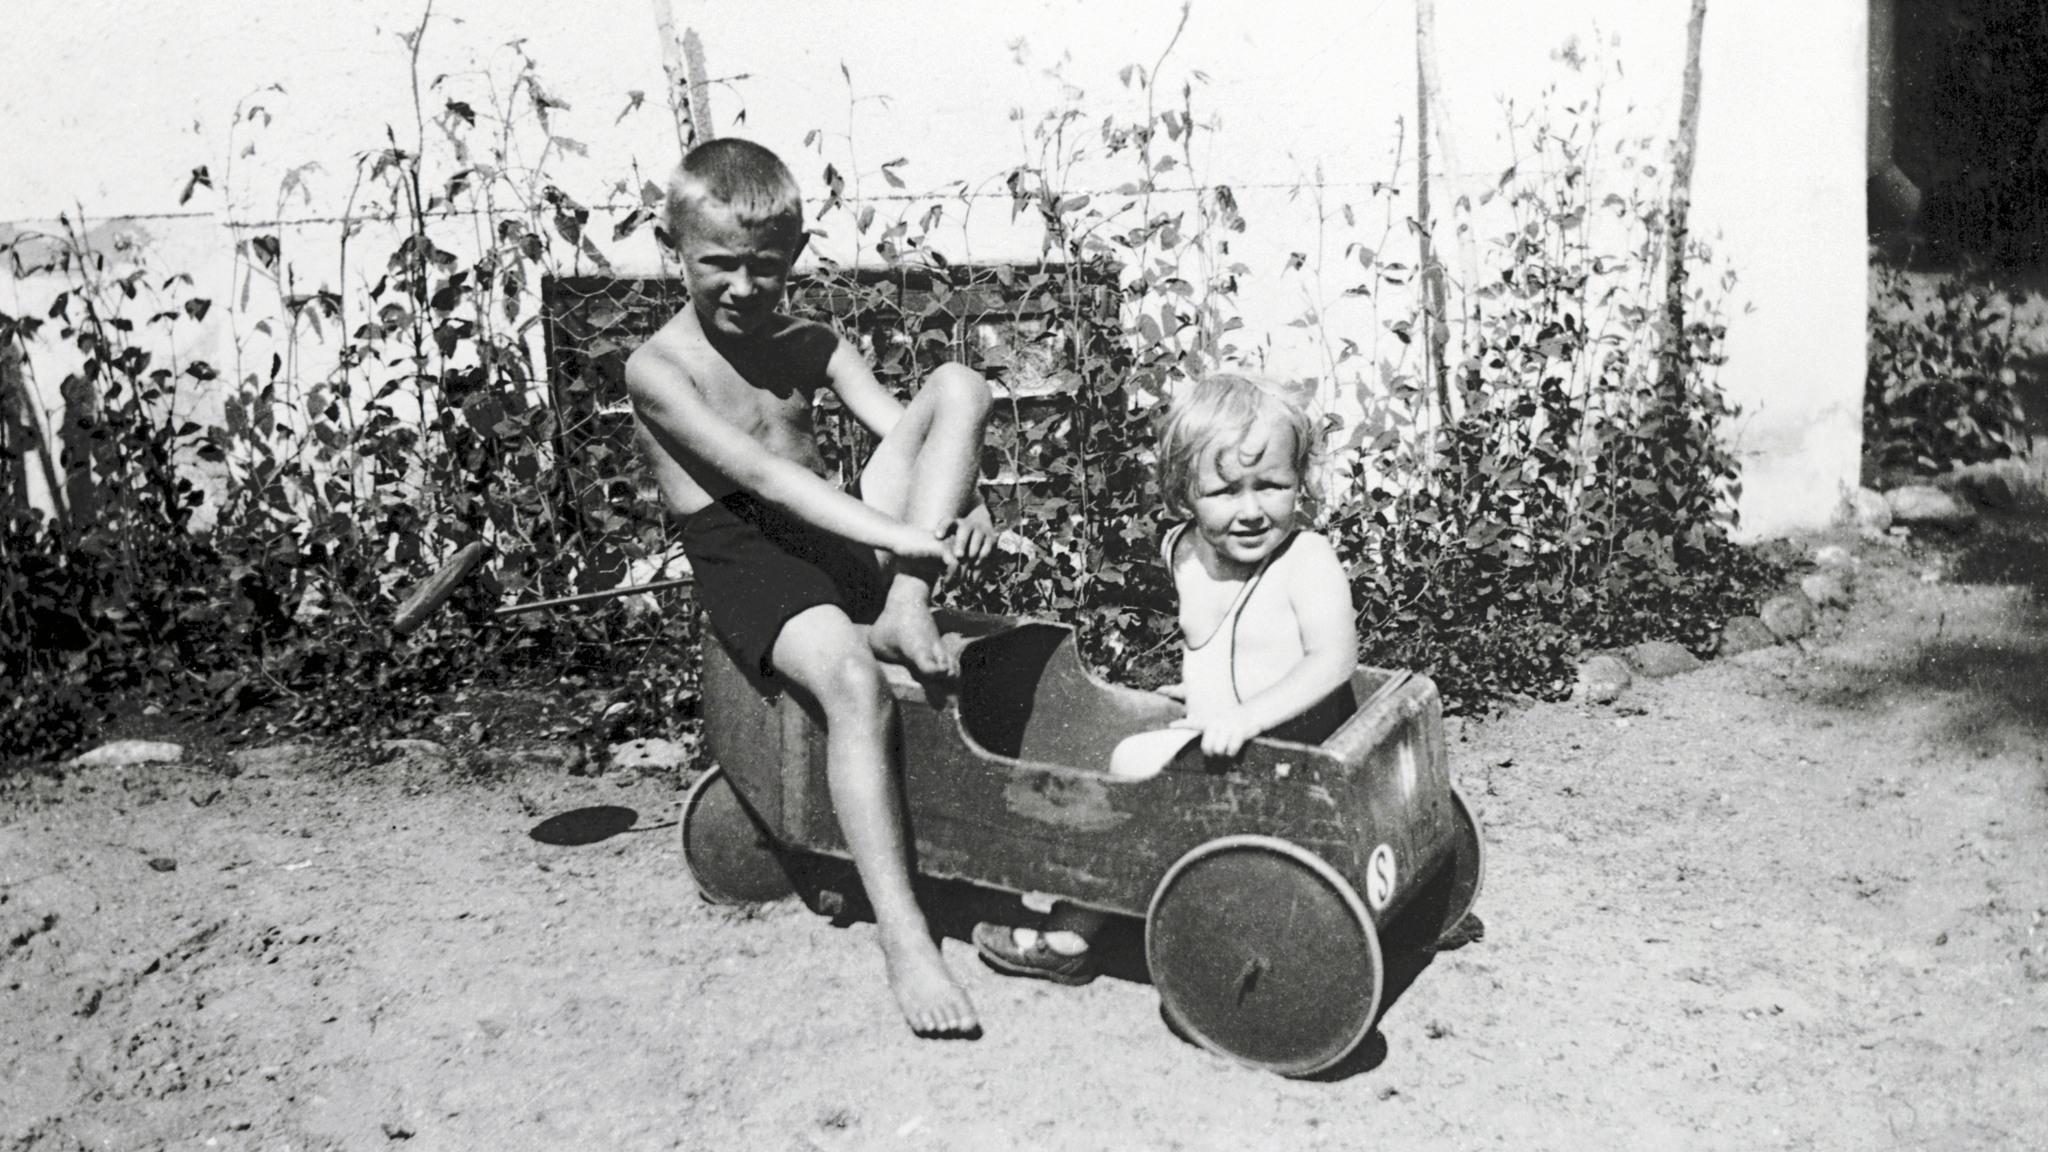 Ingvar Kamprad as a young boy in shorts sitting on a wooden toy car next to his sister.